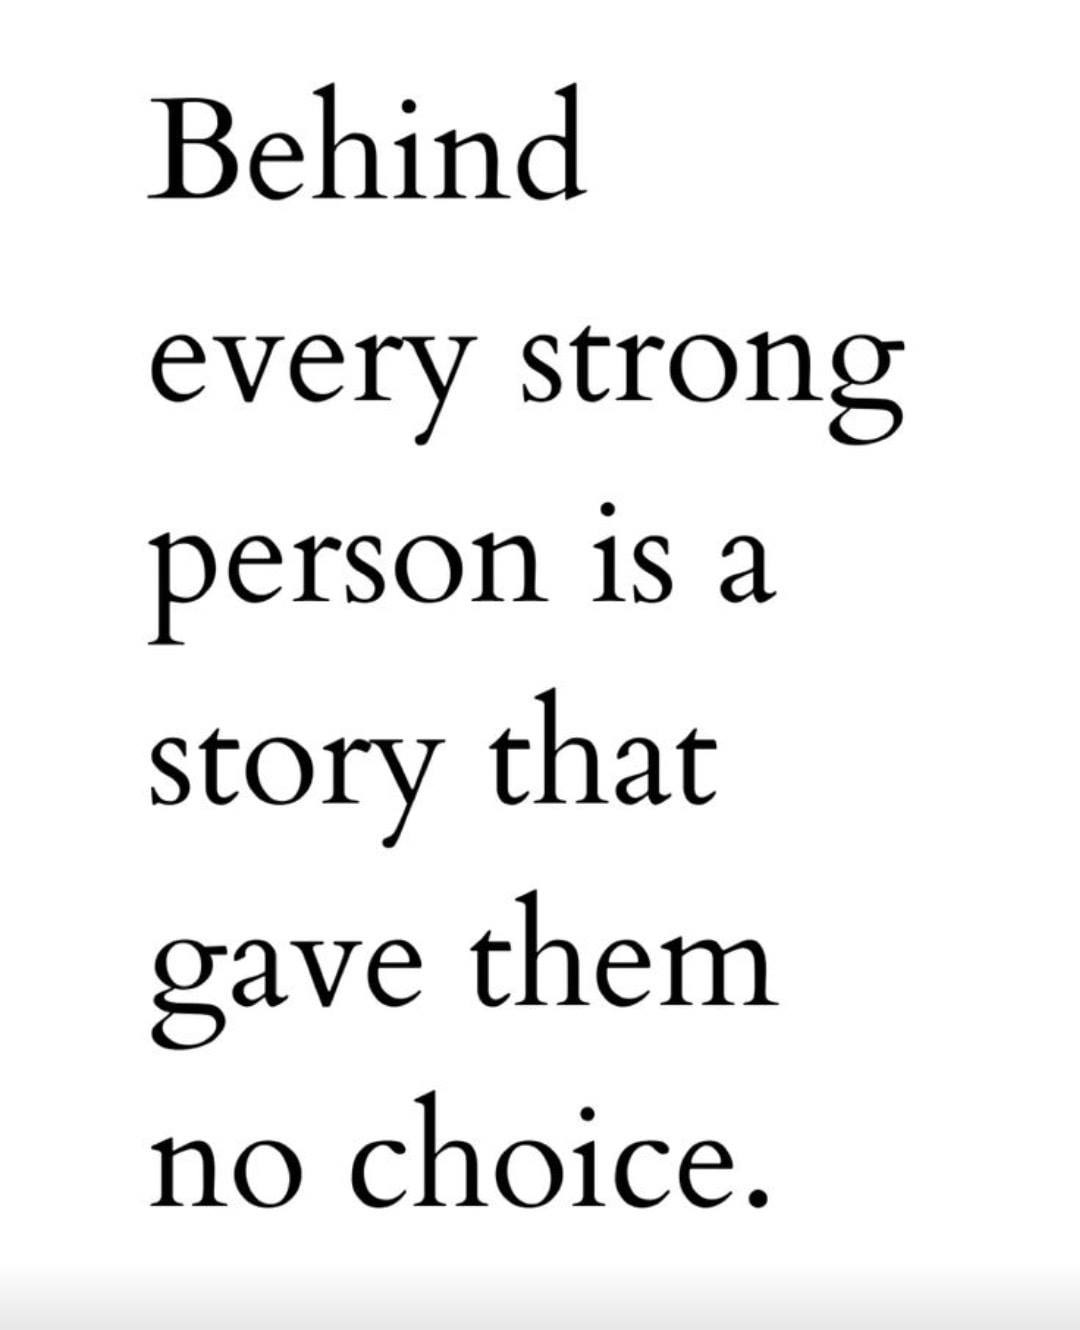 Behind every strong person is a story that gave them no choice.